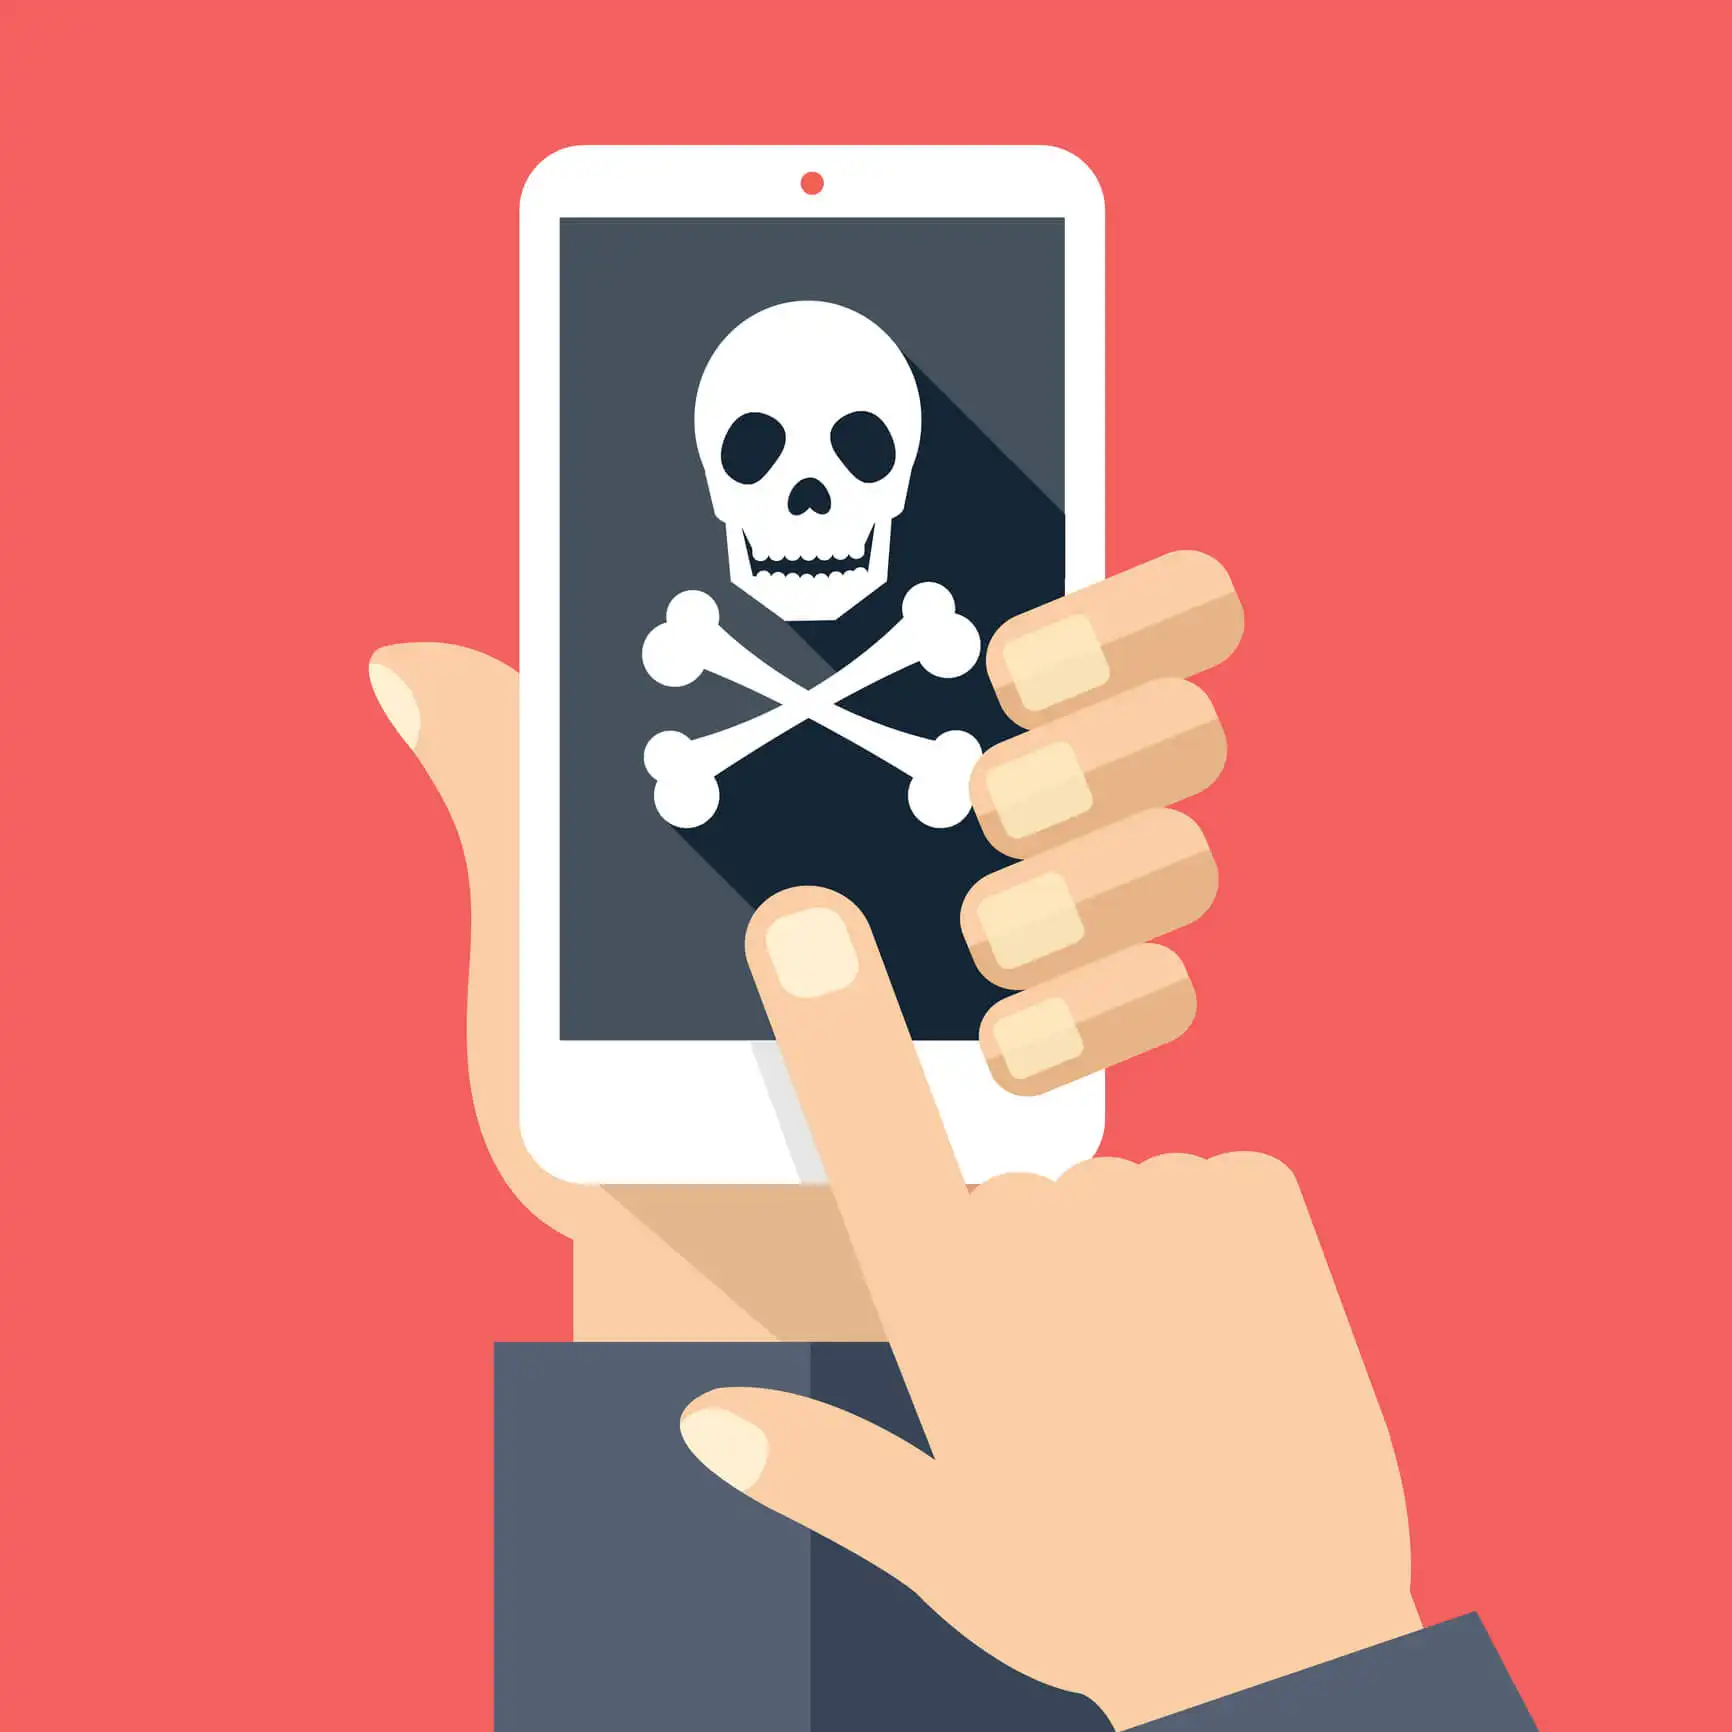 Top 5 failed mobile apps: Avoid these embarrassing mistakes.